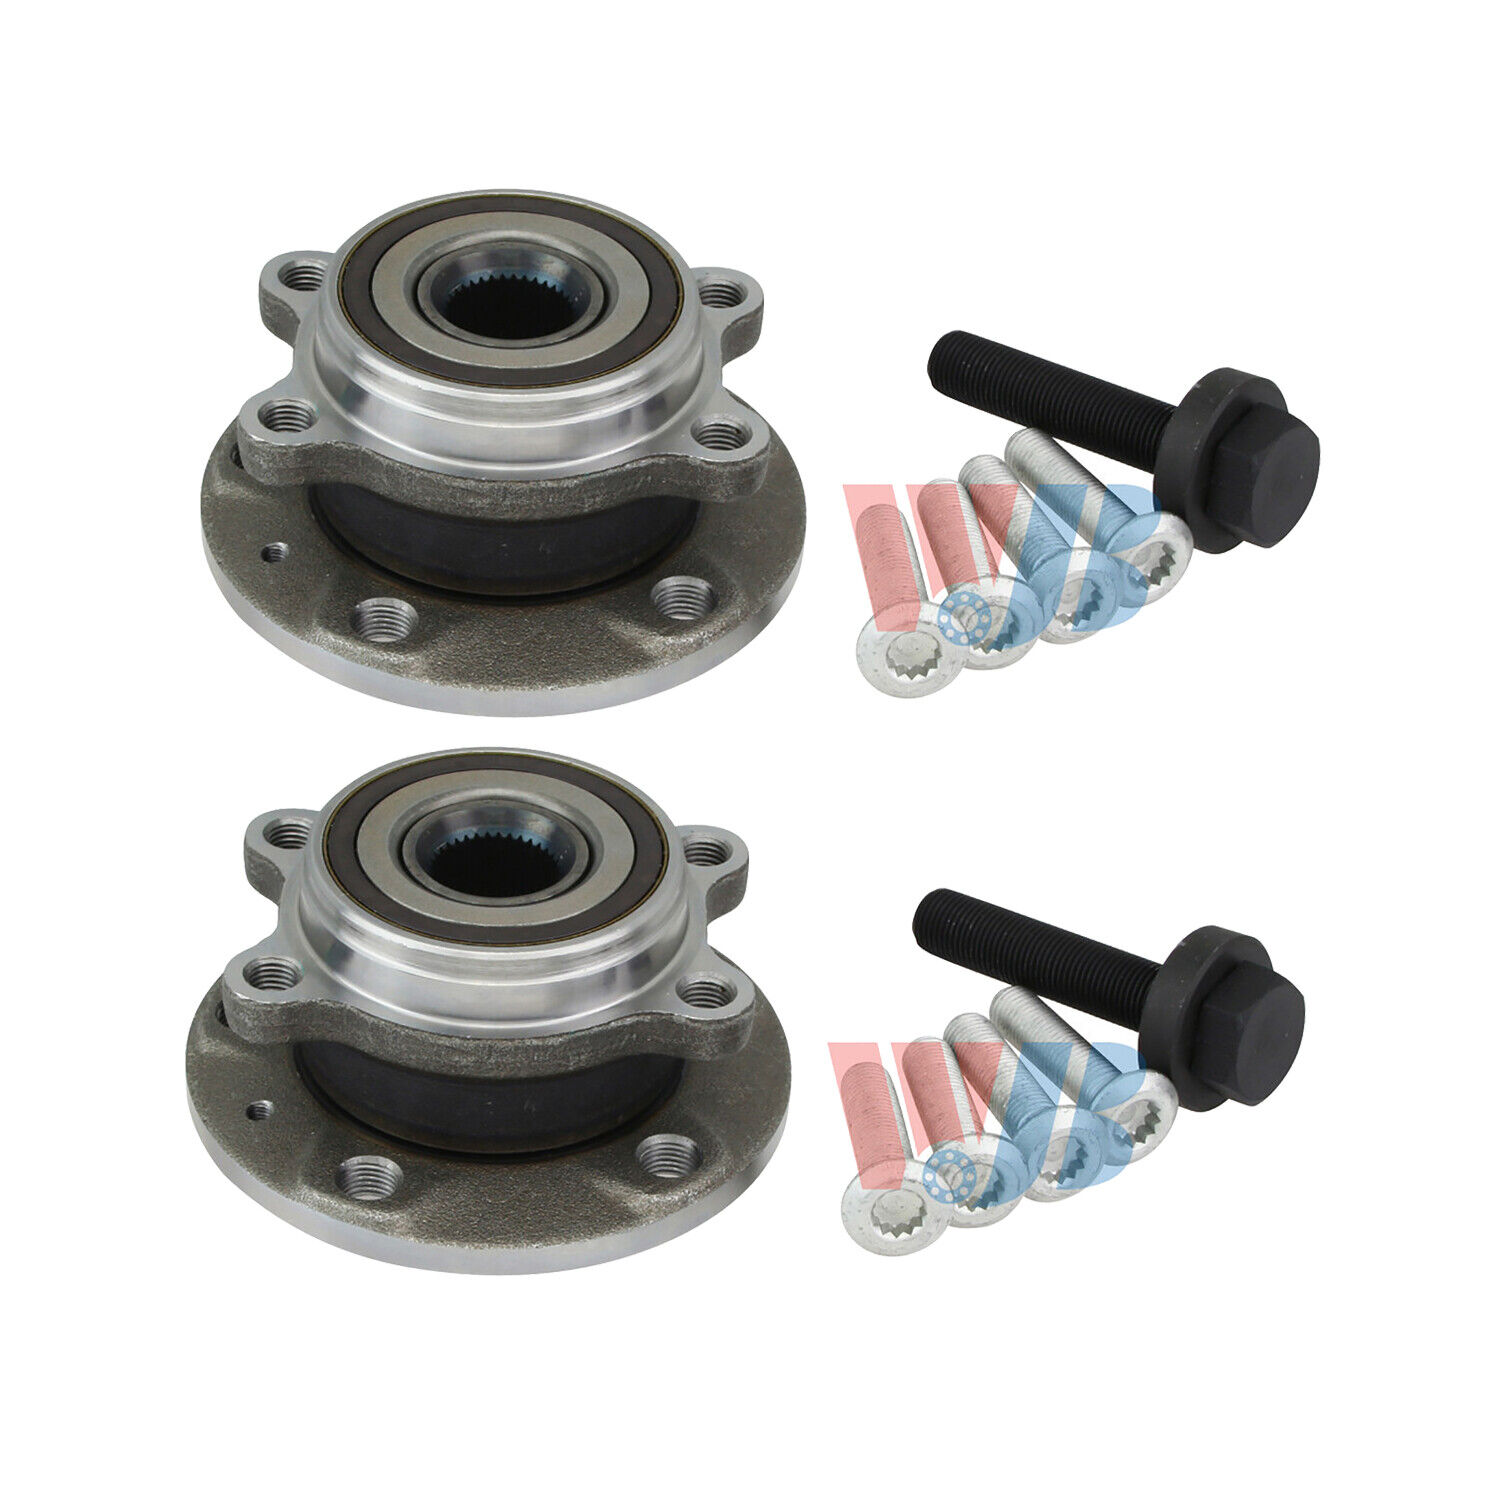 WJB Pair Front Wheel Hub Bearing Assembly For VW CC Jetta GOLF BEETLE